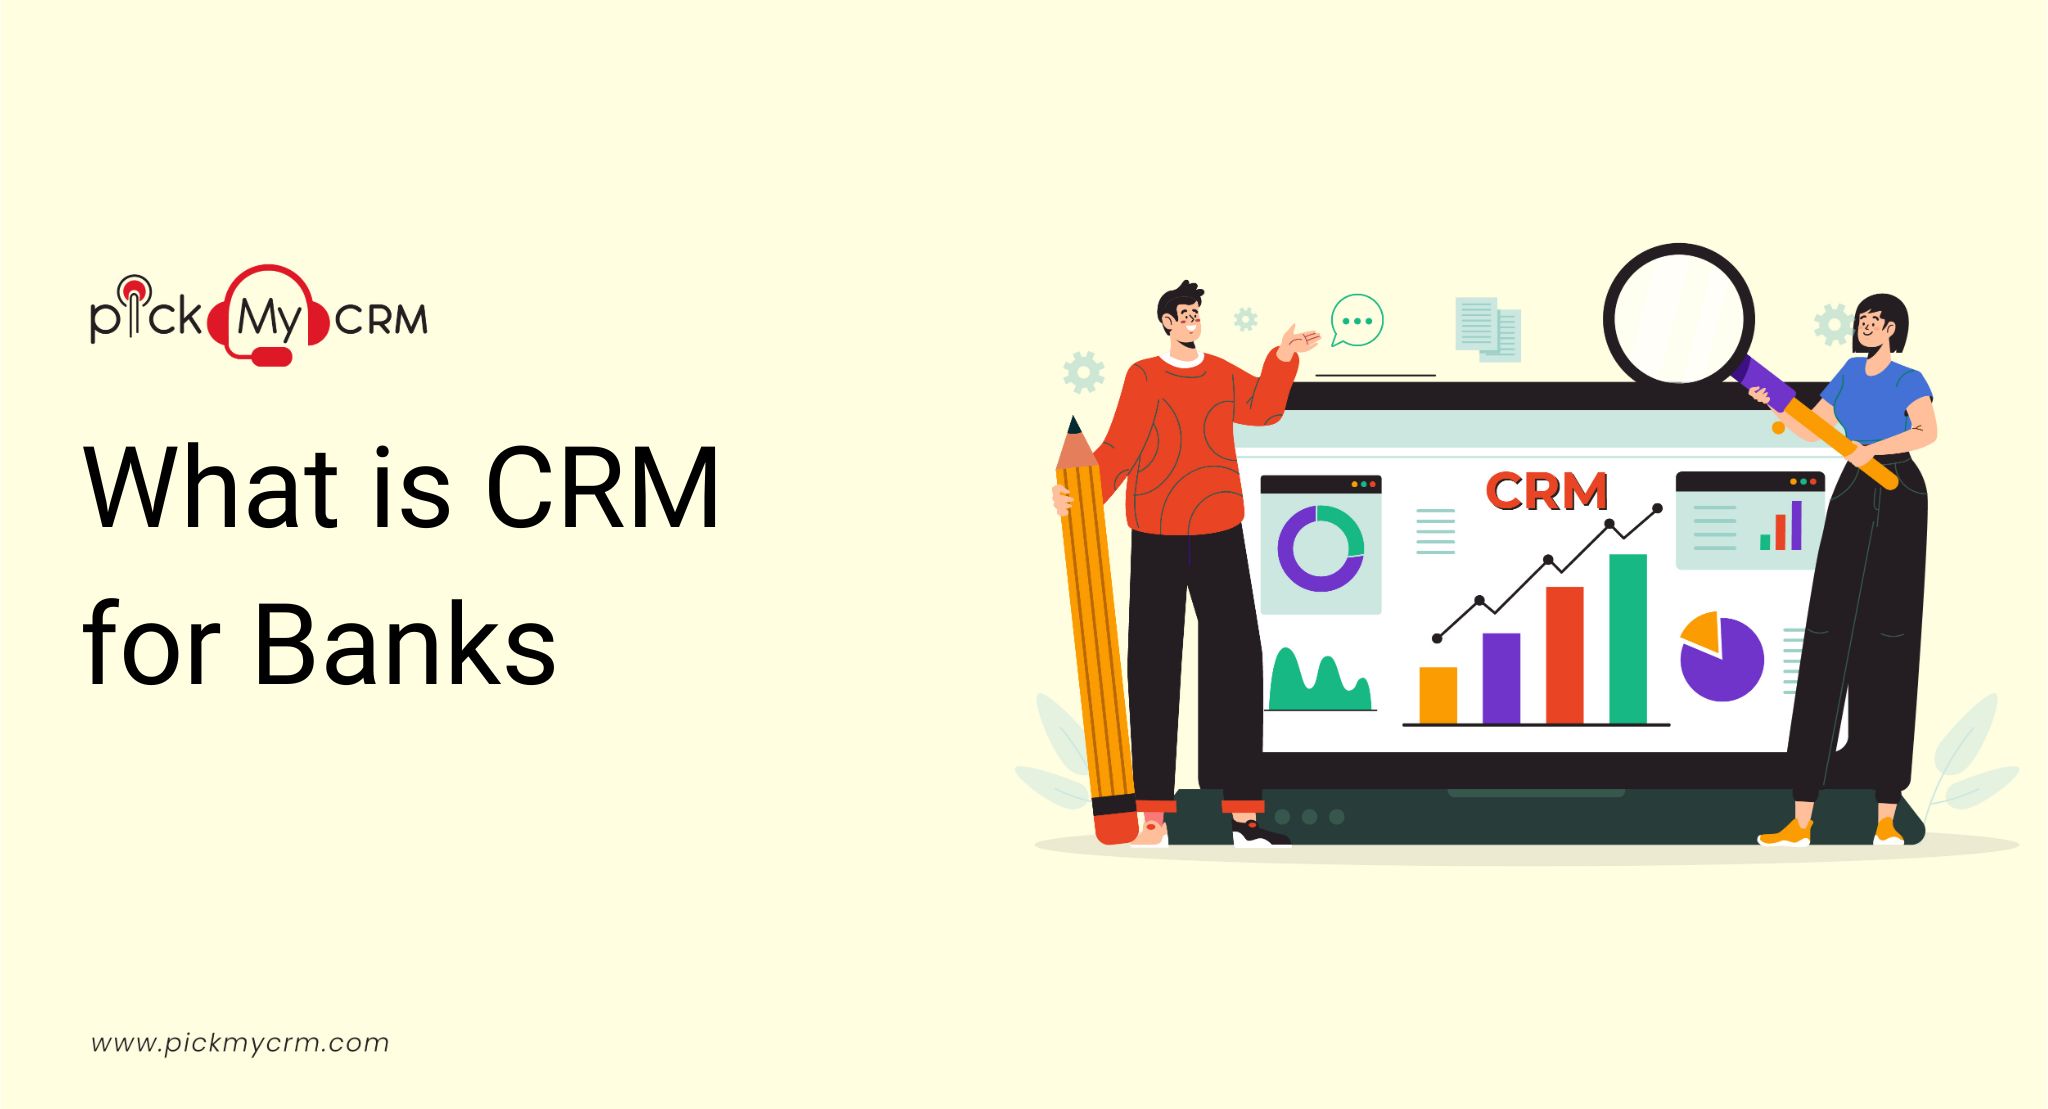 What is CRM for Banks?